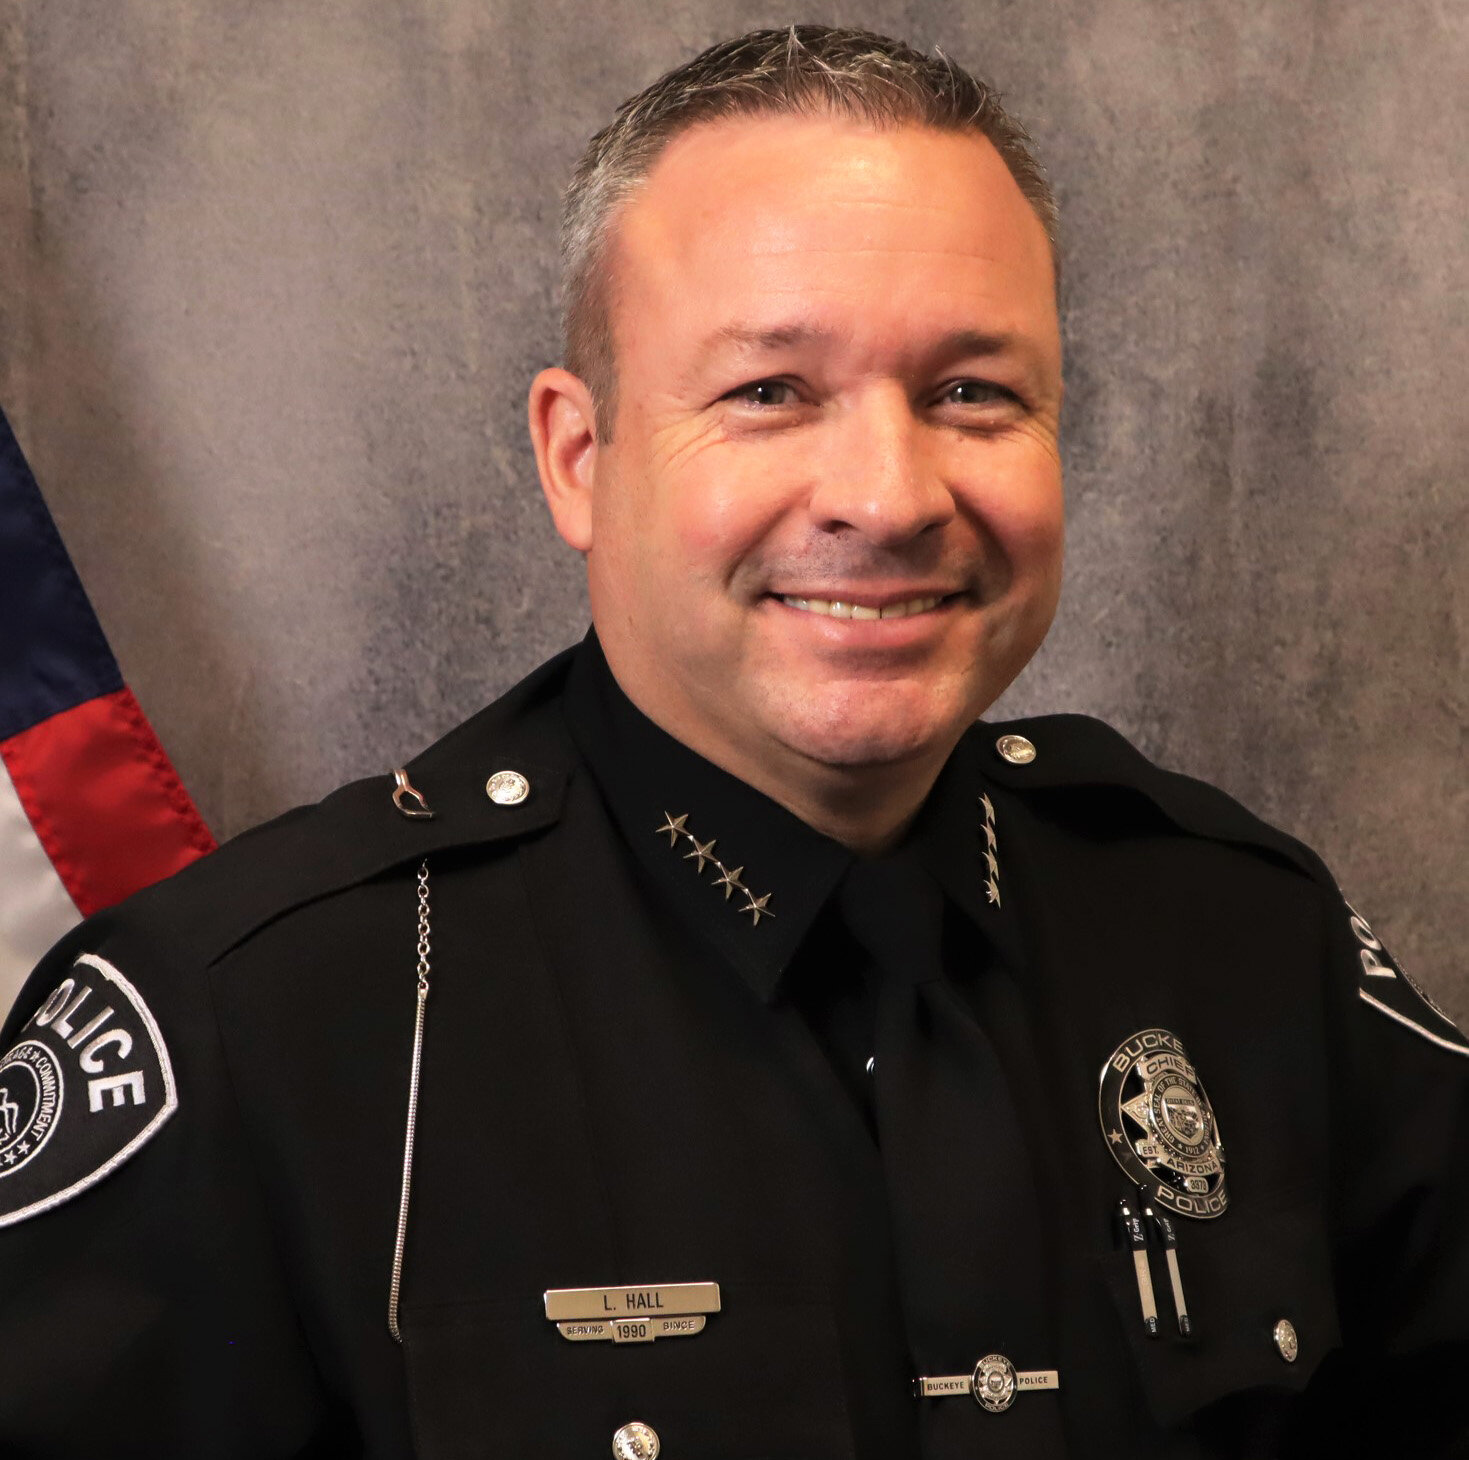 Chief Larry Hall concludes a law enforcement career of 33 years.